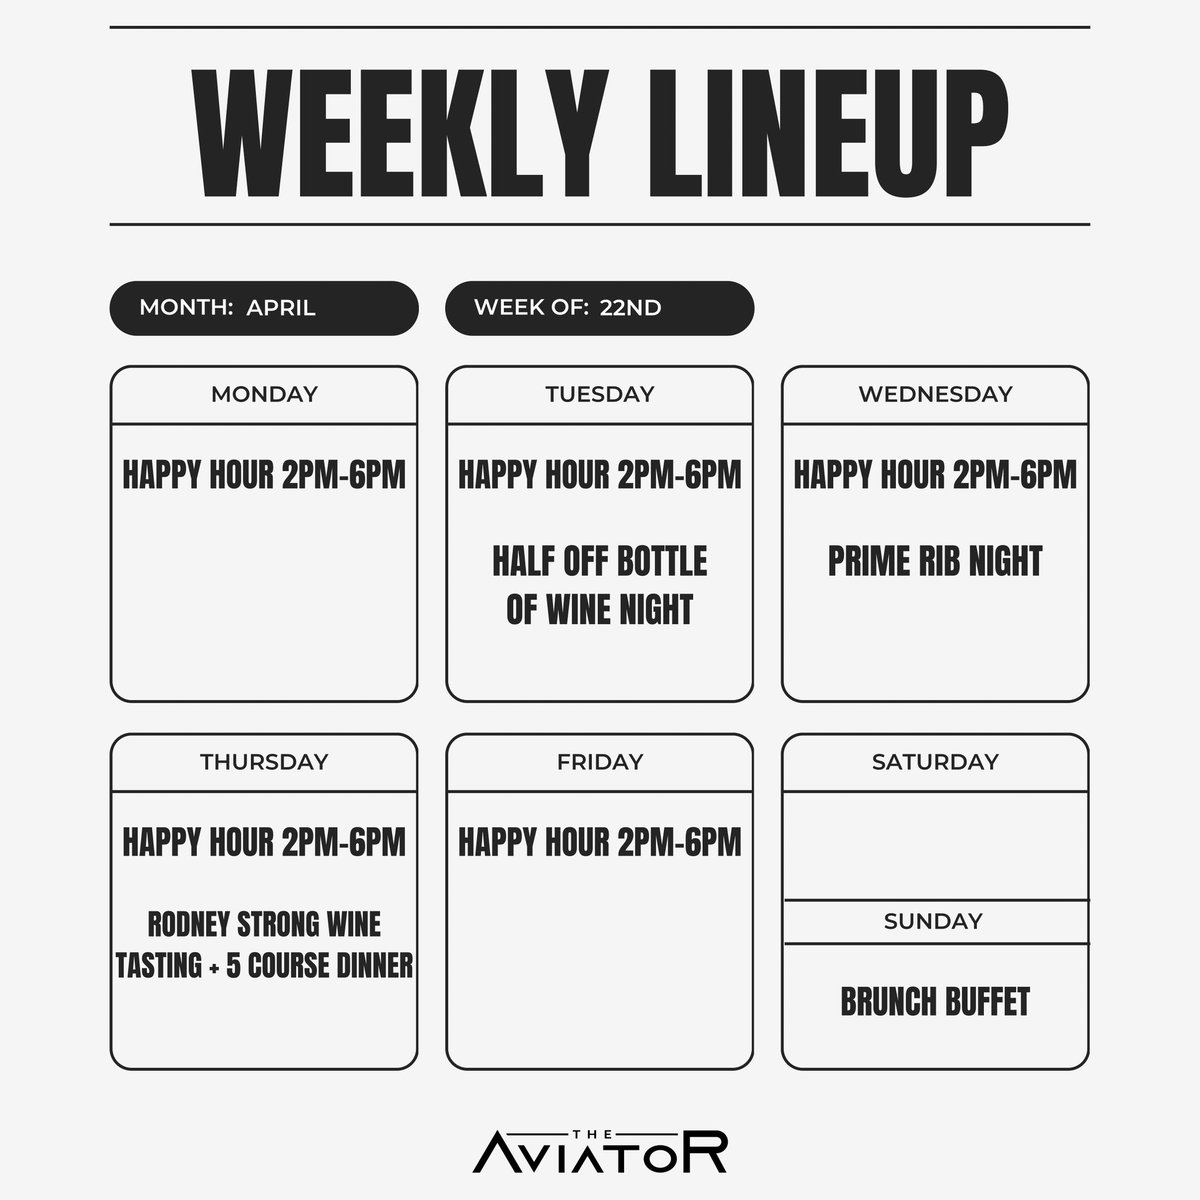 Your Aviator weekly lineup is here, Cleveland! 🫶🏻✨